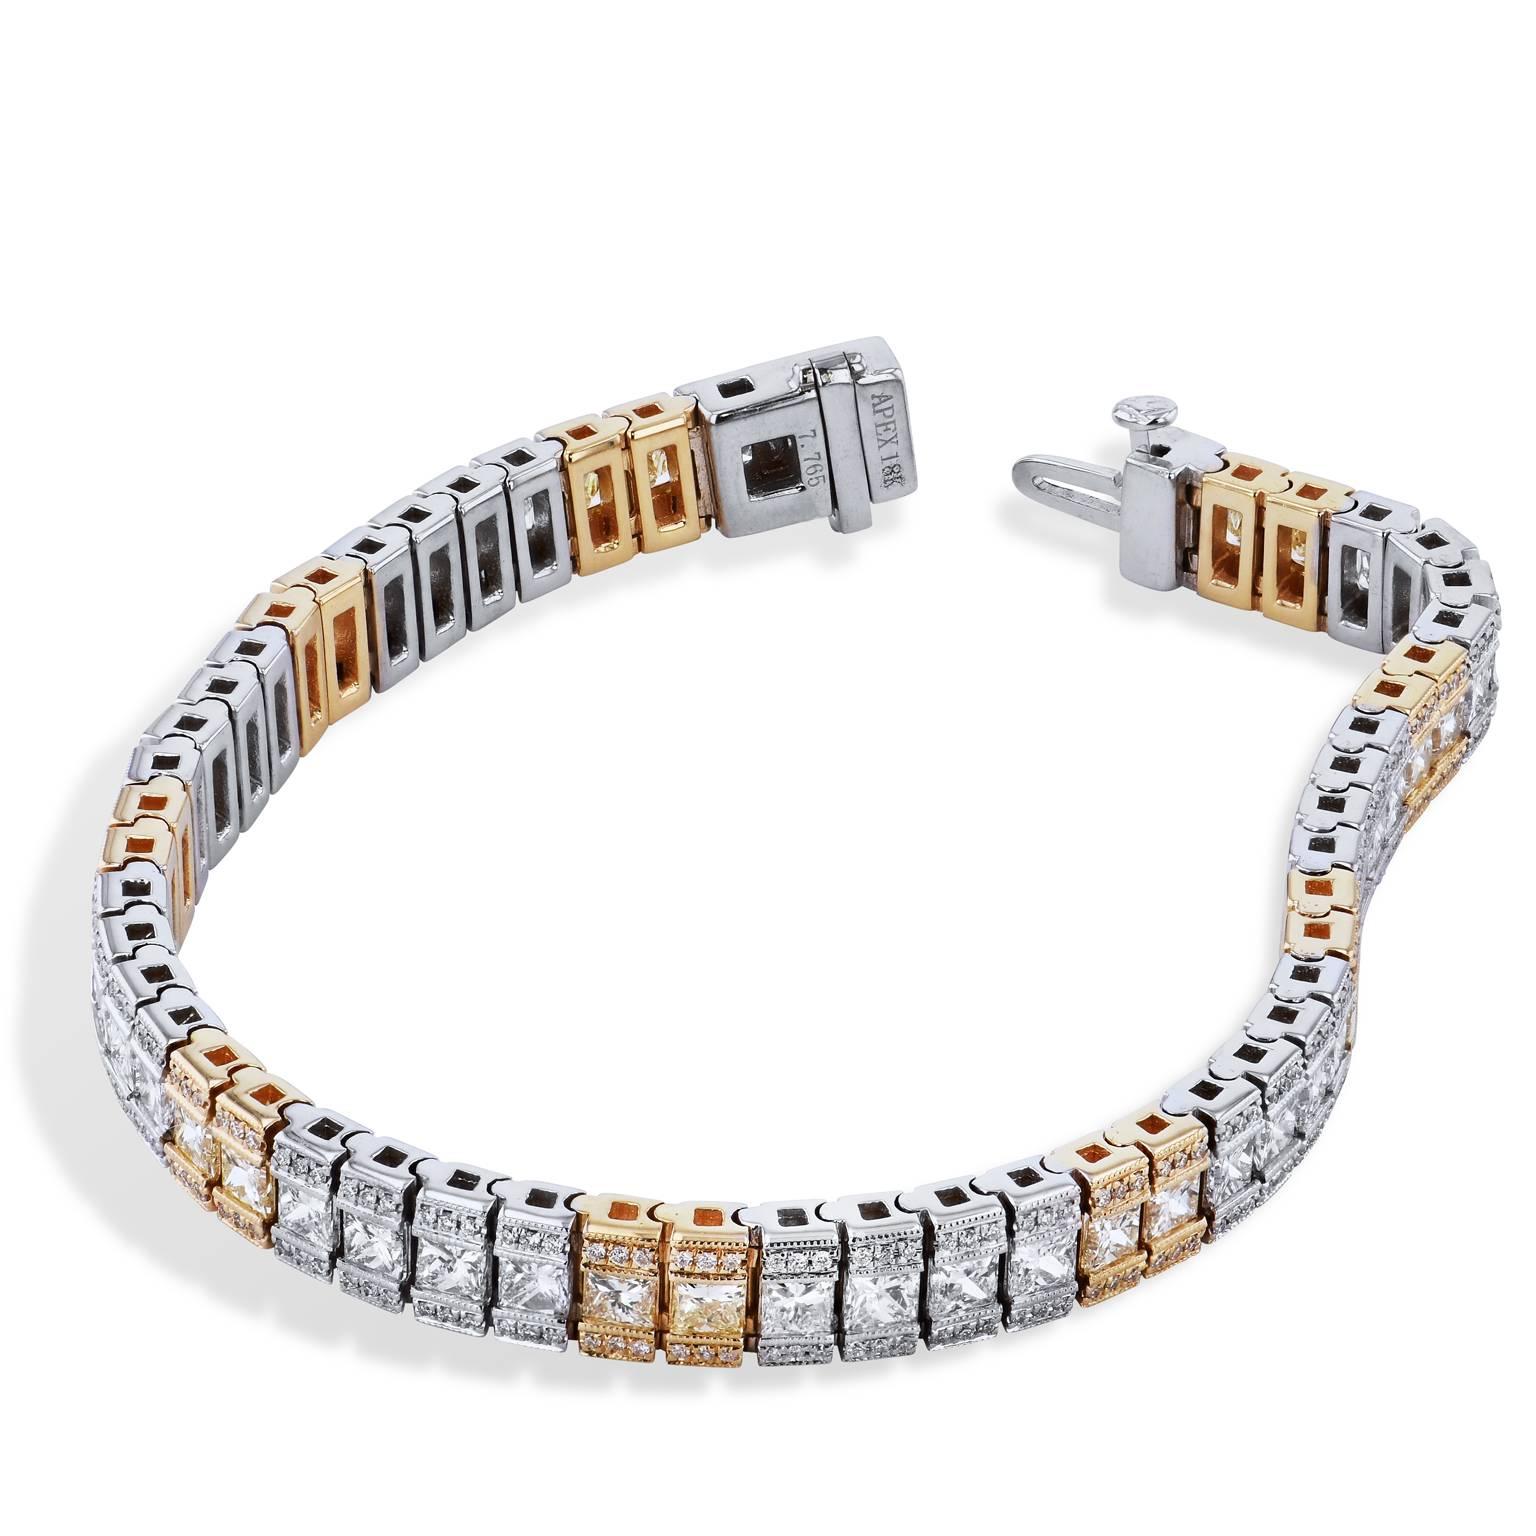 7.77 Carat Princess Cut and Round Cut Diamond Link Bracelet in 18 karat Gold  

Alternating 18 karat yellow gold and white gold create a visually stunning display in this previously loved 7.77 carat princess cut and round brilliant cut diamond